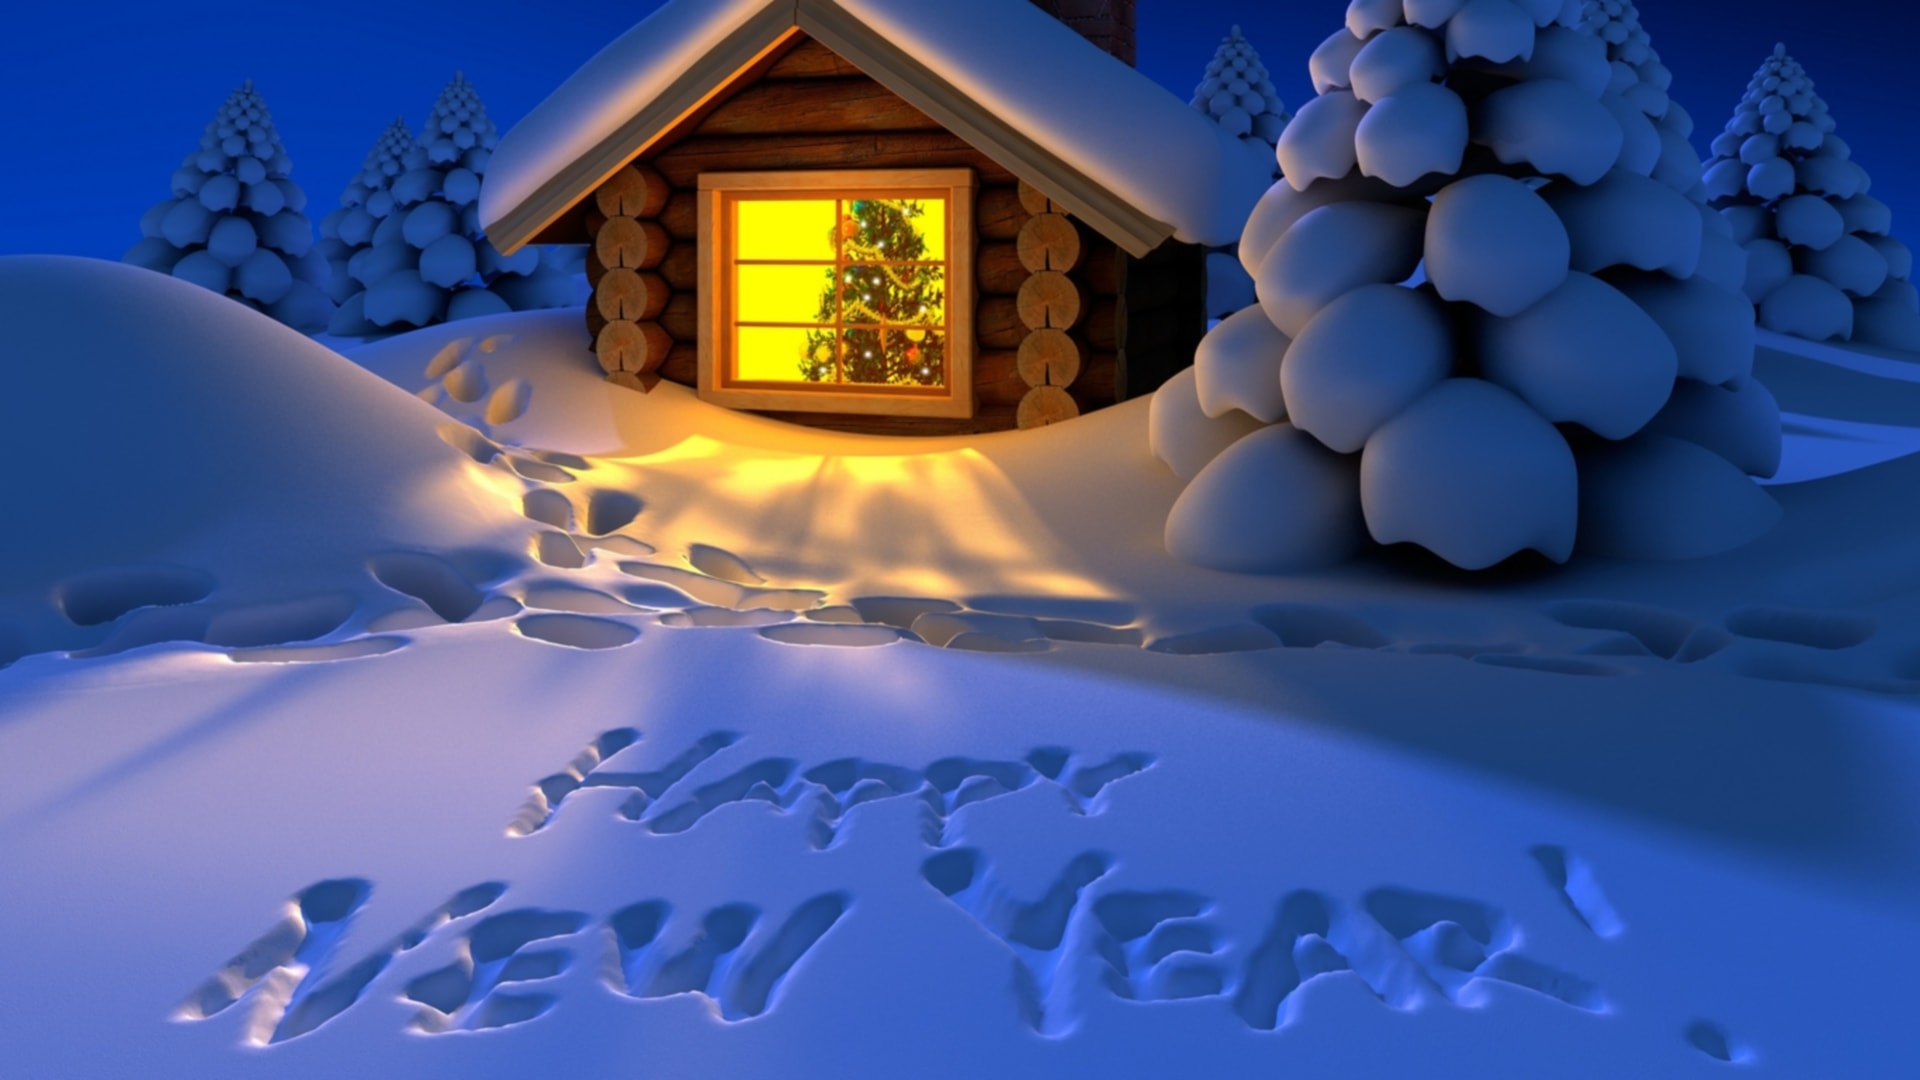 Happy New Year 2019 Wallpapers